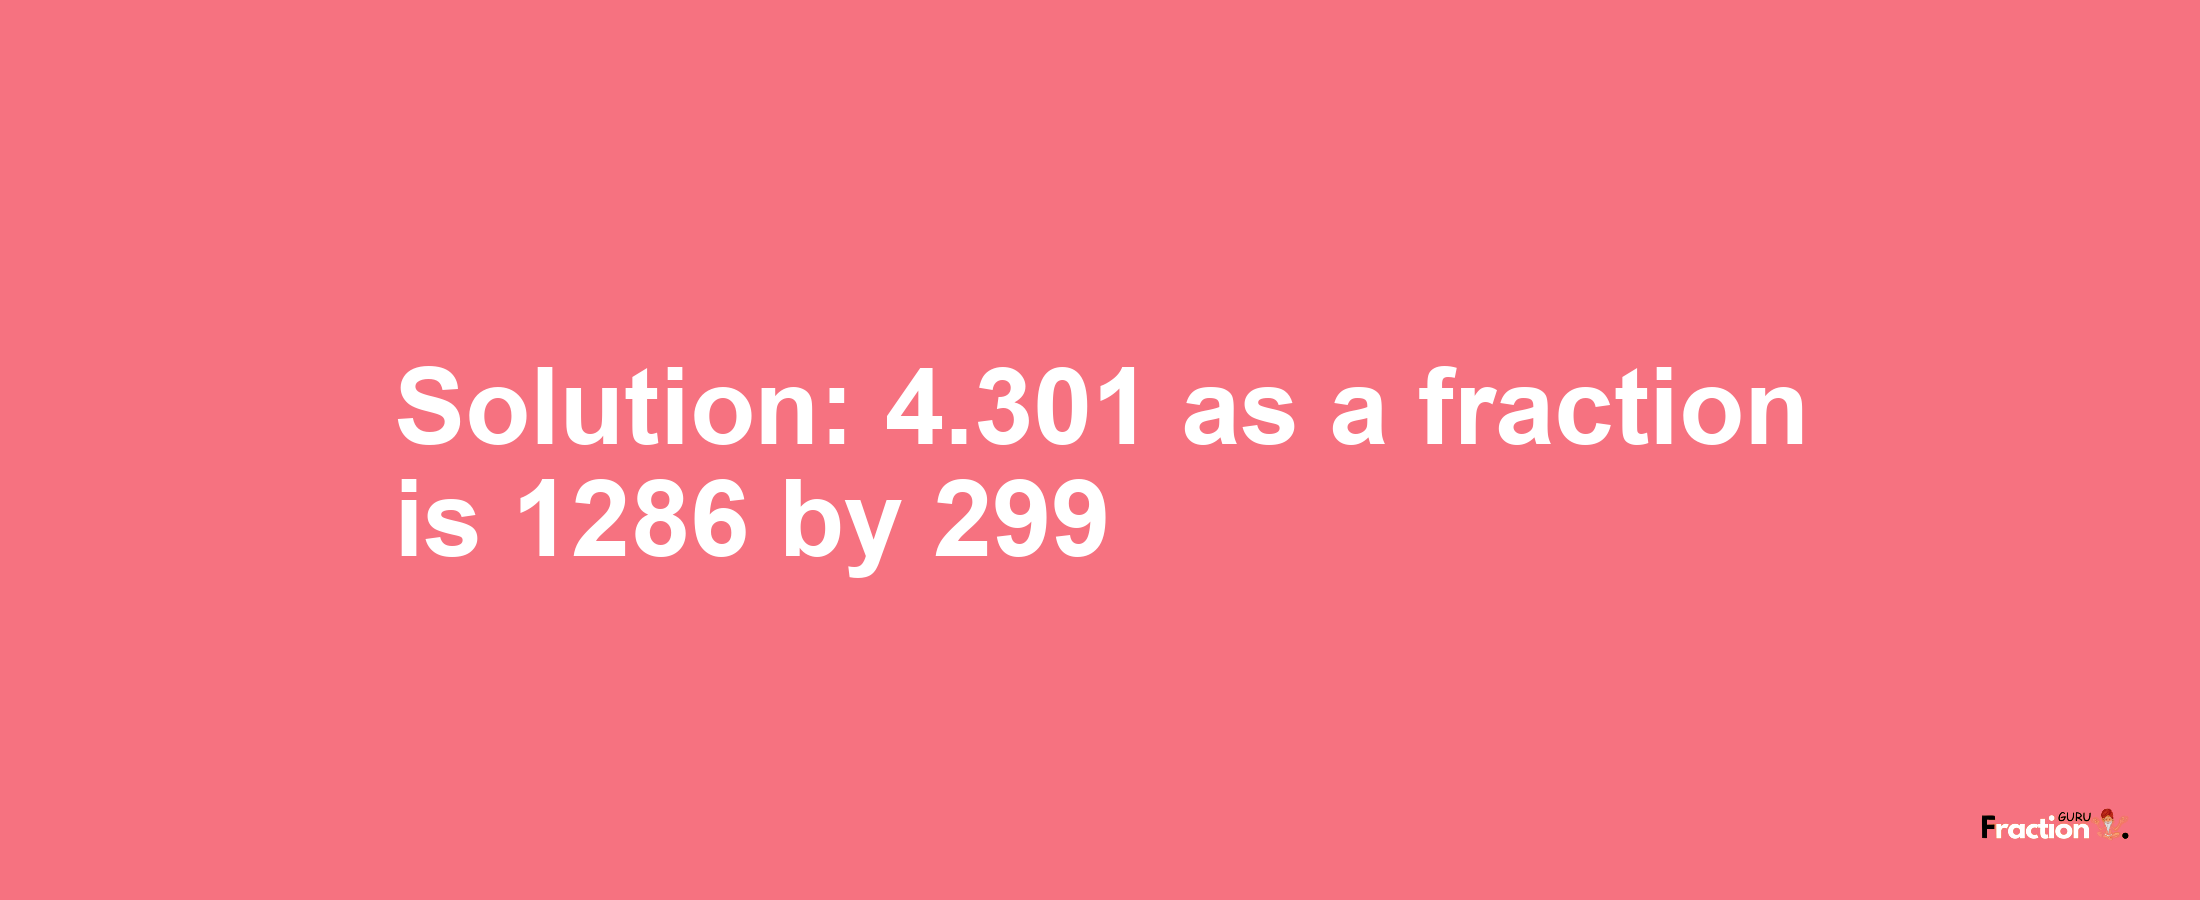 Solution:4.301 as a fraction is 1286/299